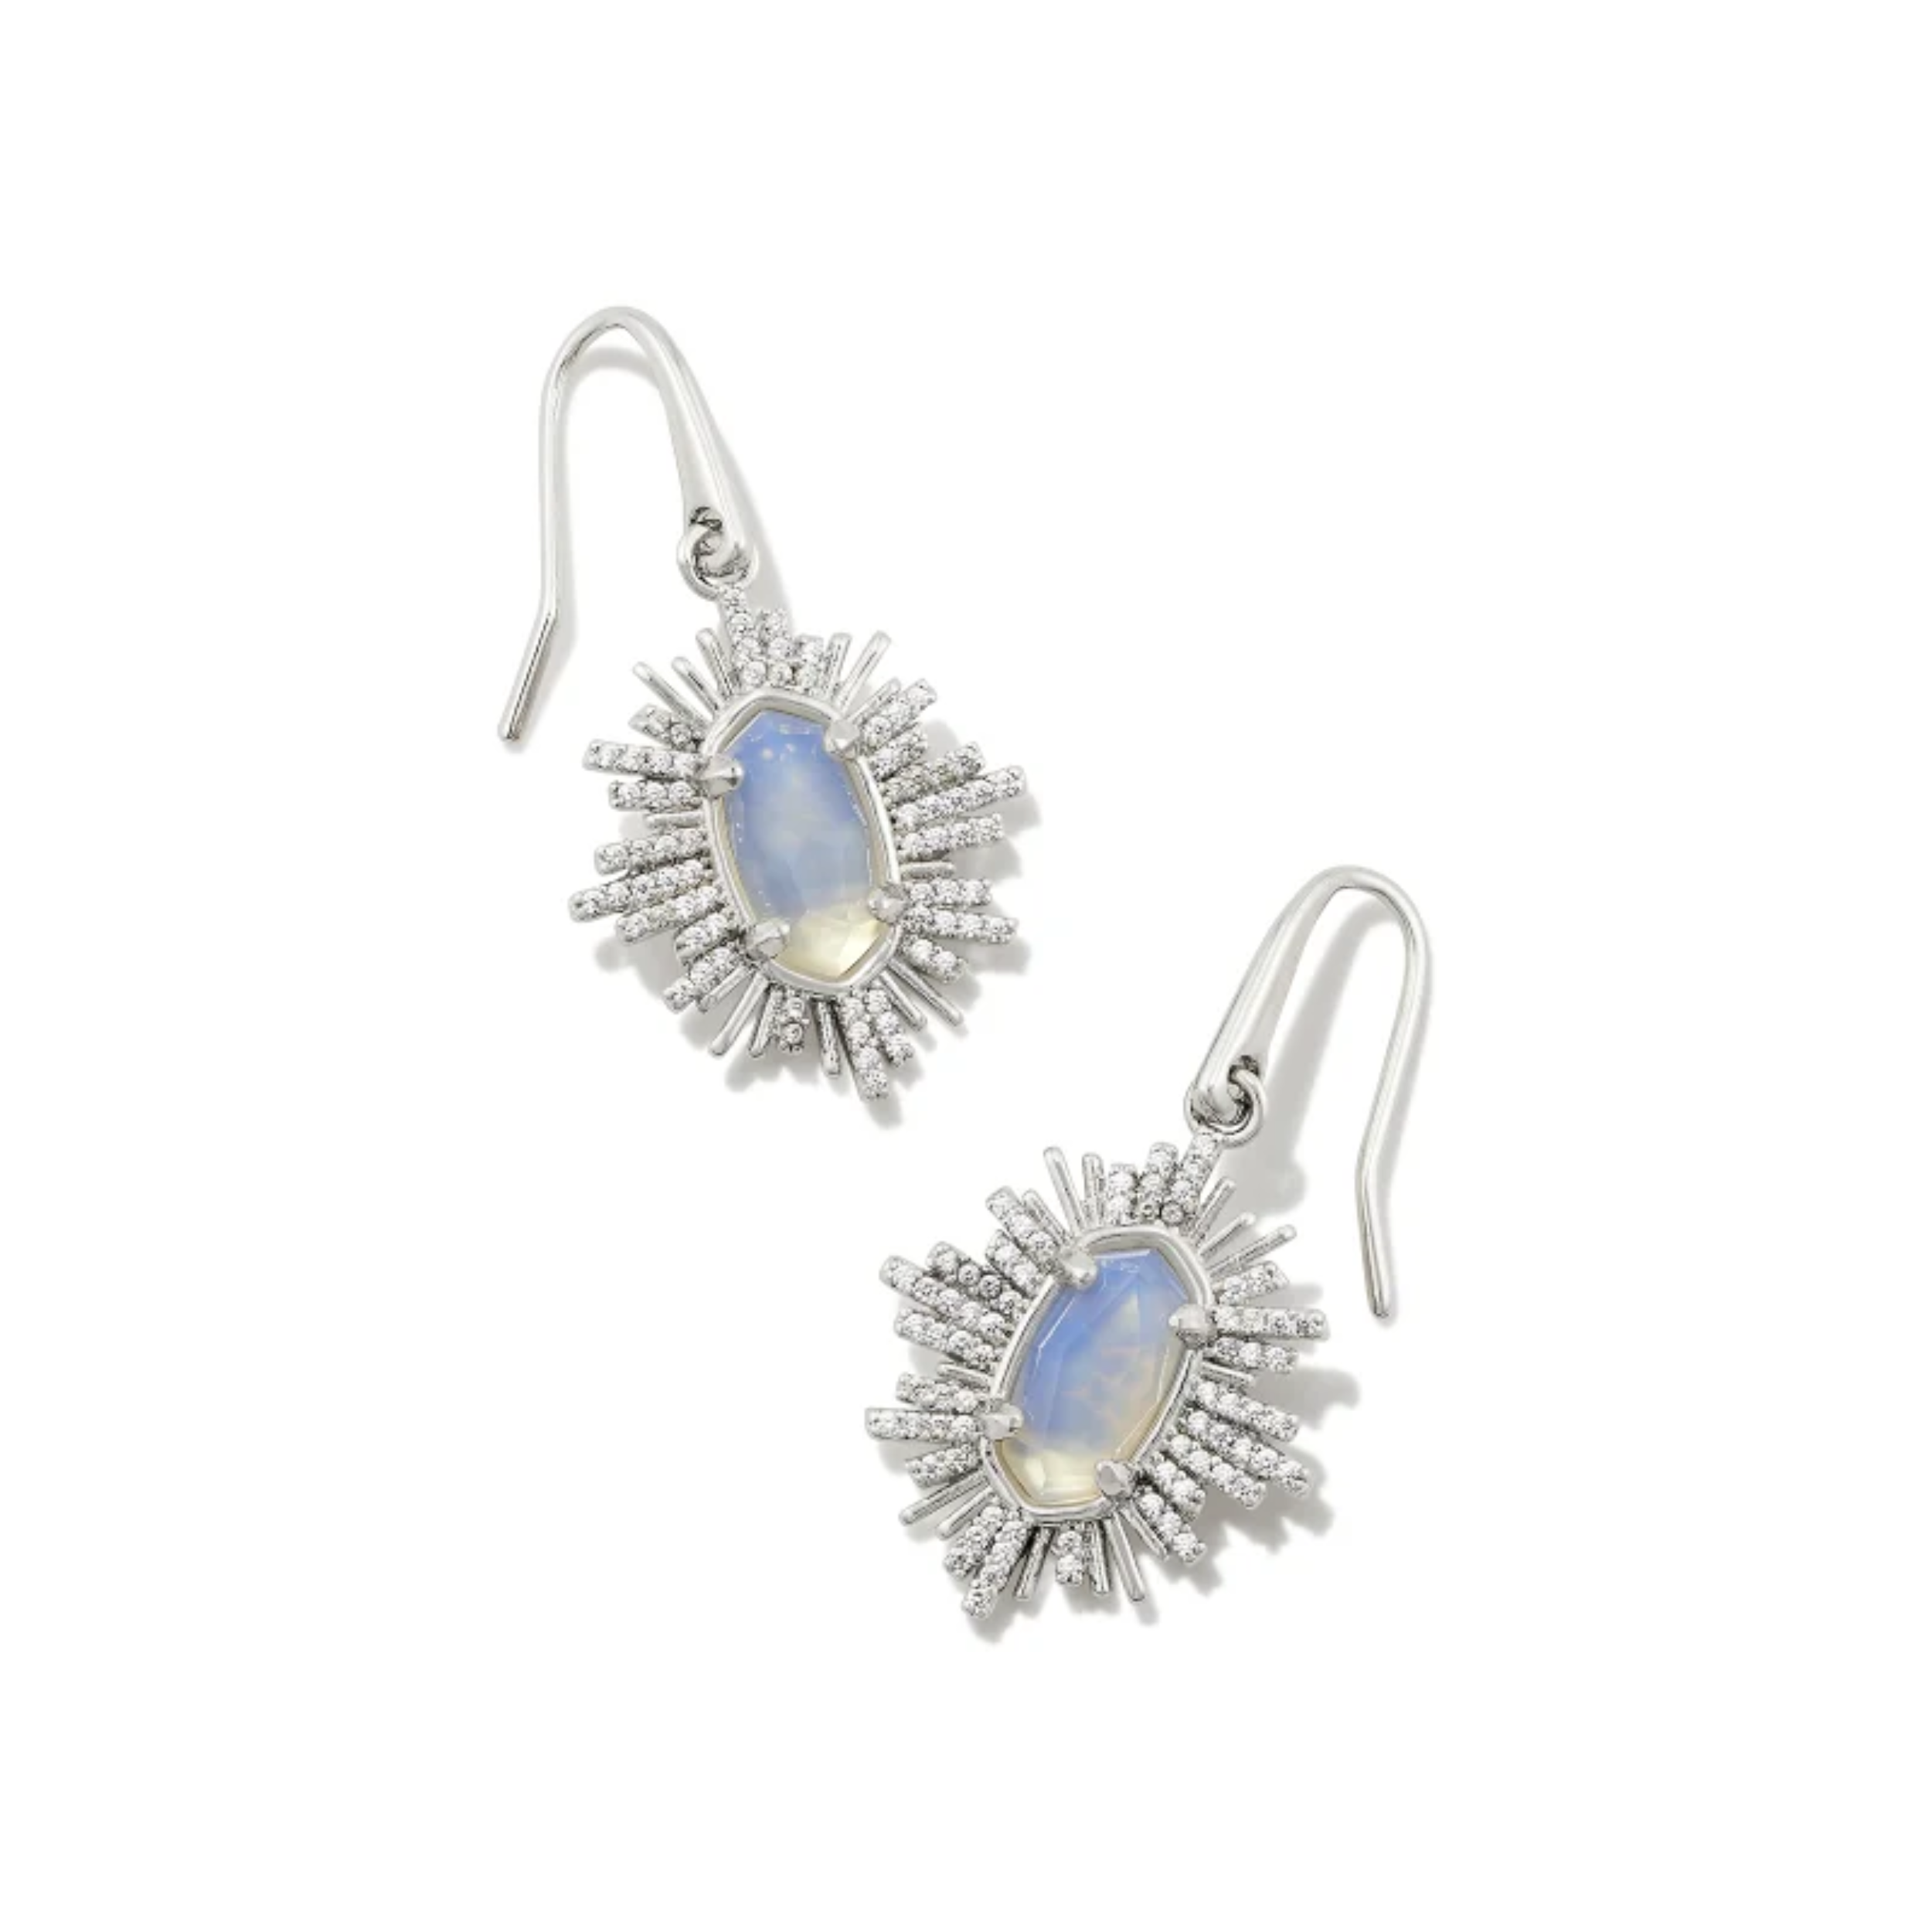 These Grayson Sunburst Silver Drop Earrings in Iridescent Opalite Illusion by Kendra Scott are pictured on a white background.